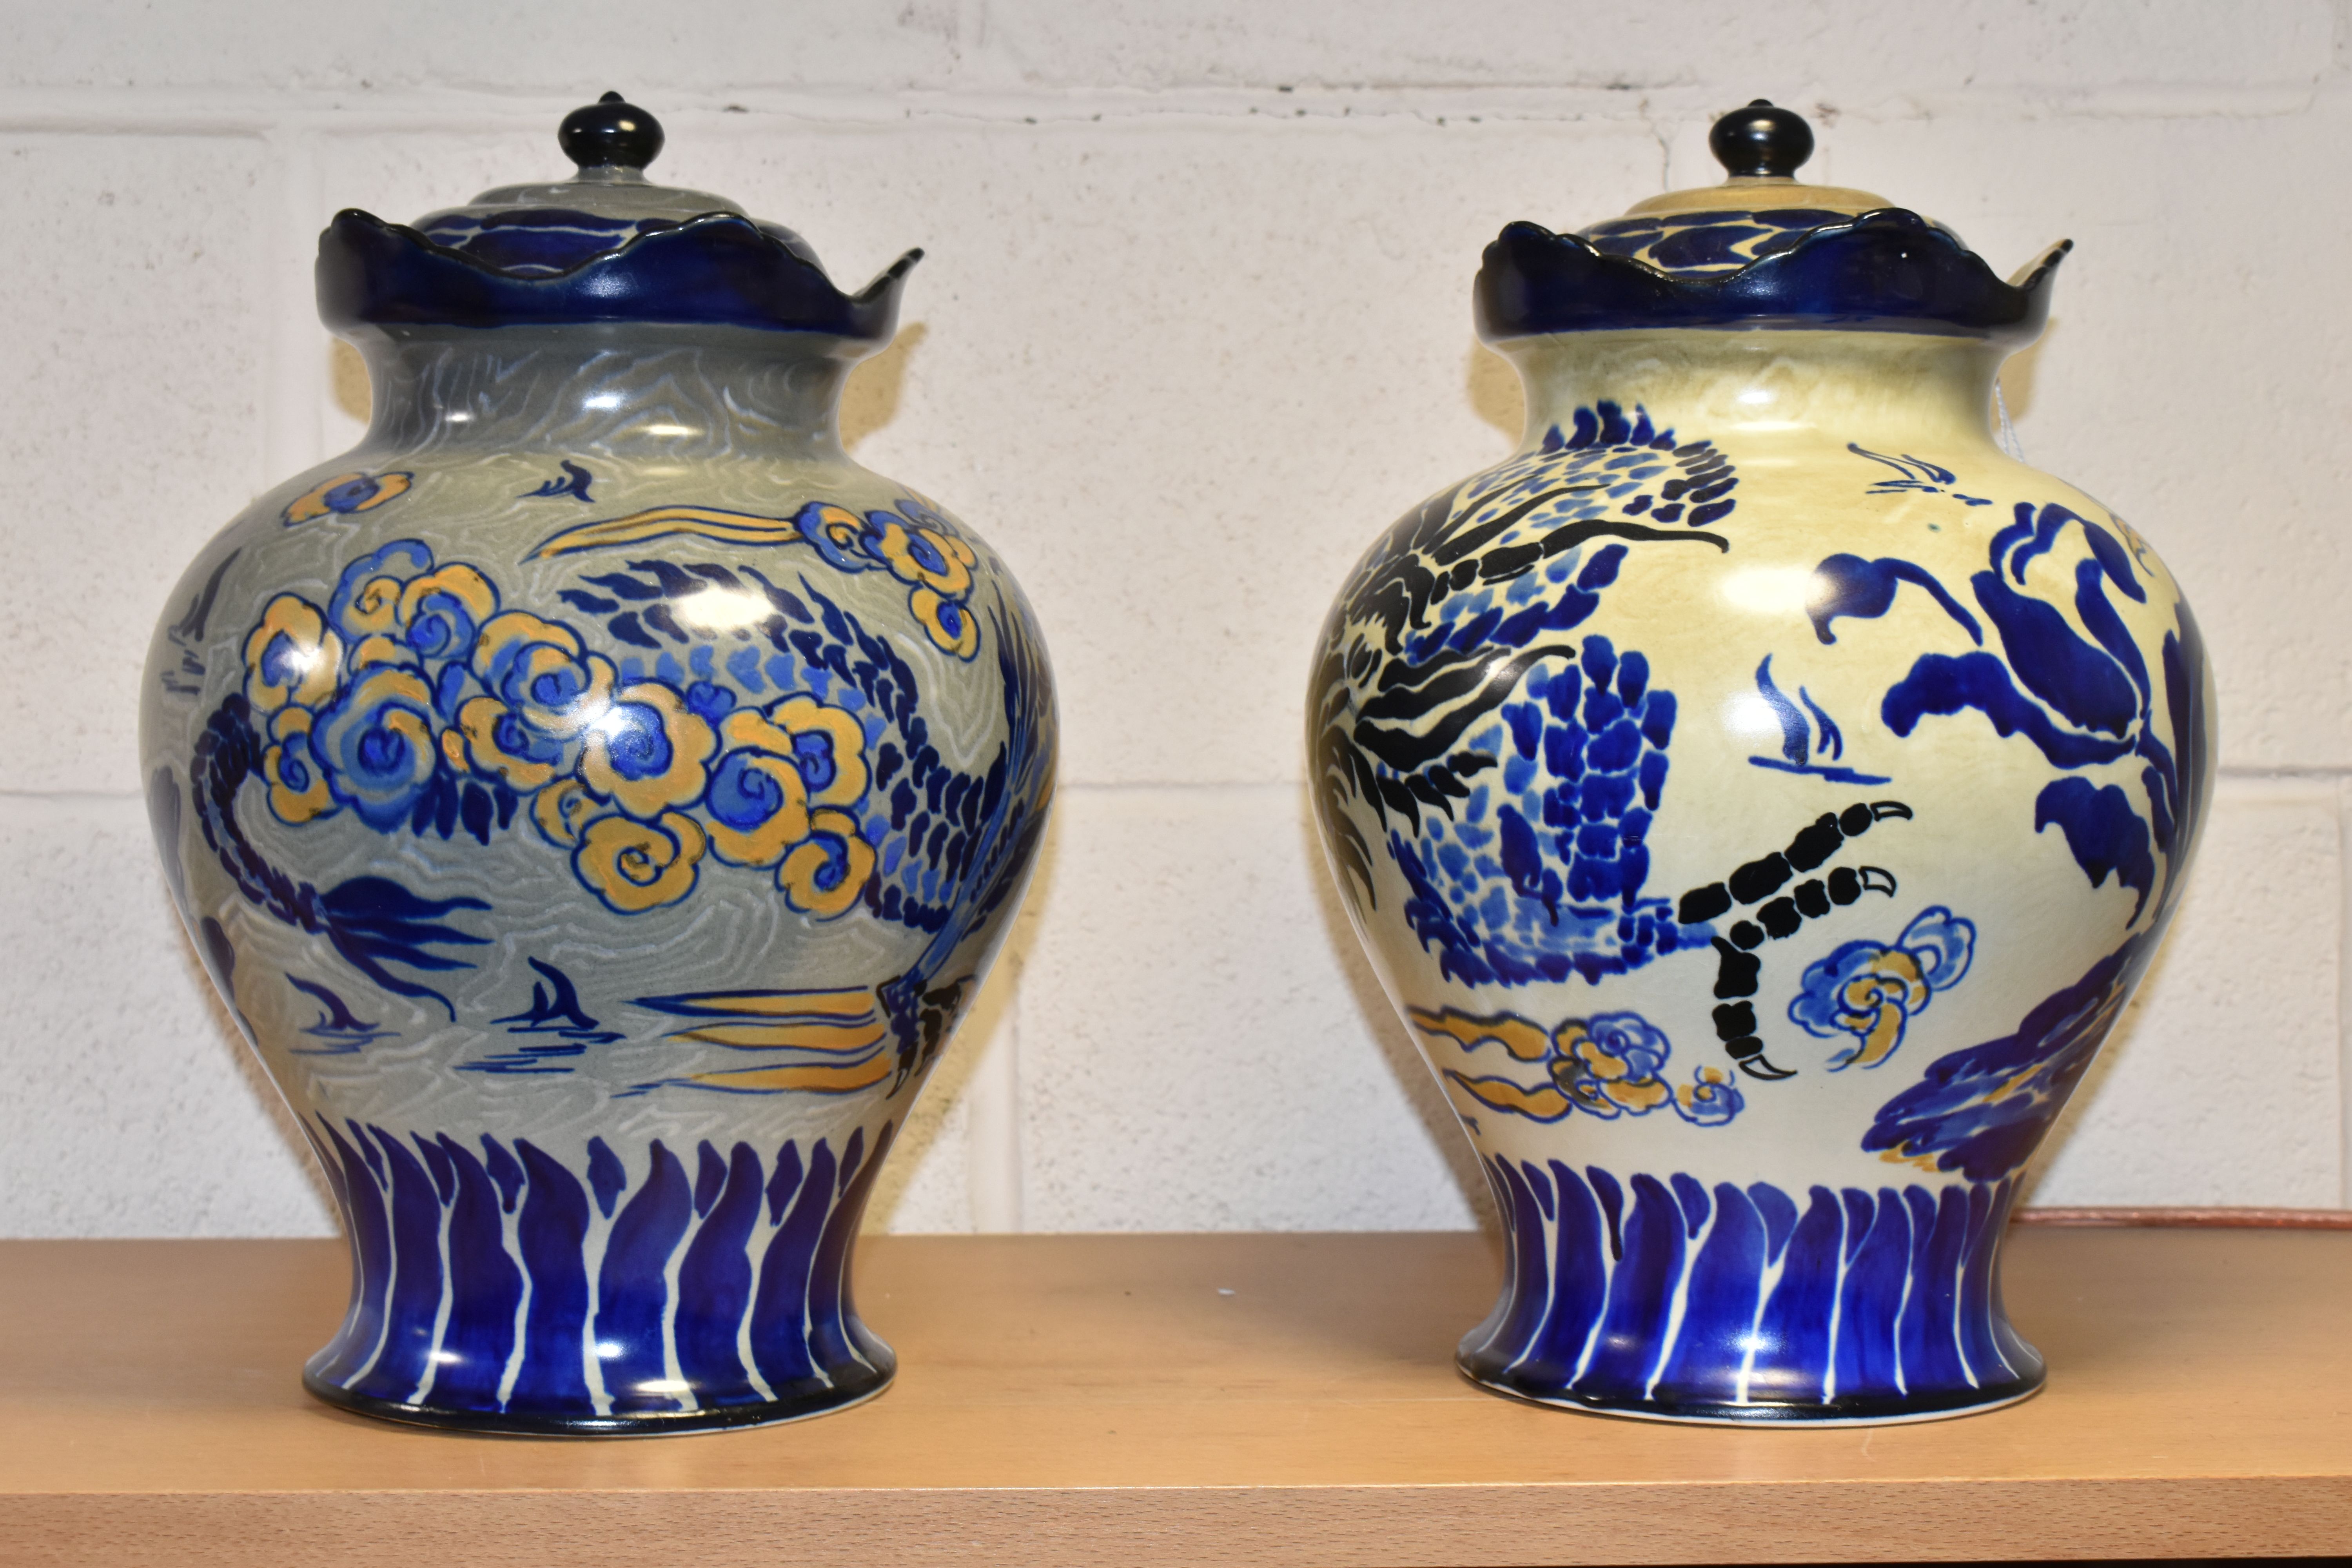 TWO ROYAL CAULDON/CAULDON WARE COVERED JARS, decorated with dragons on blue-grey and beige patterned - Image 3 of 7